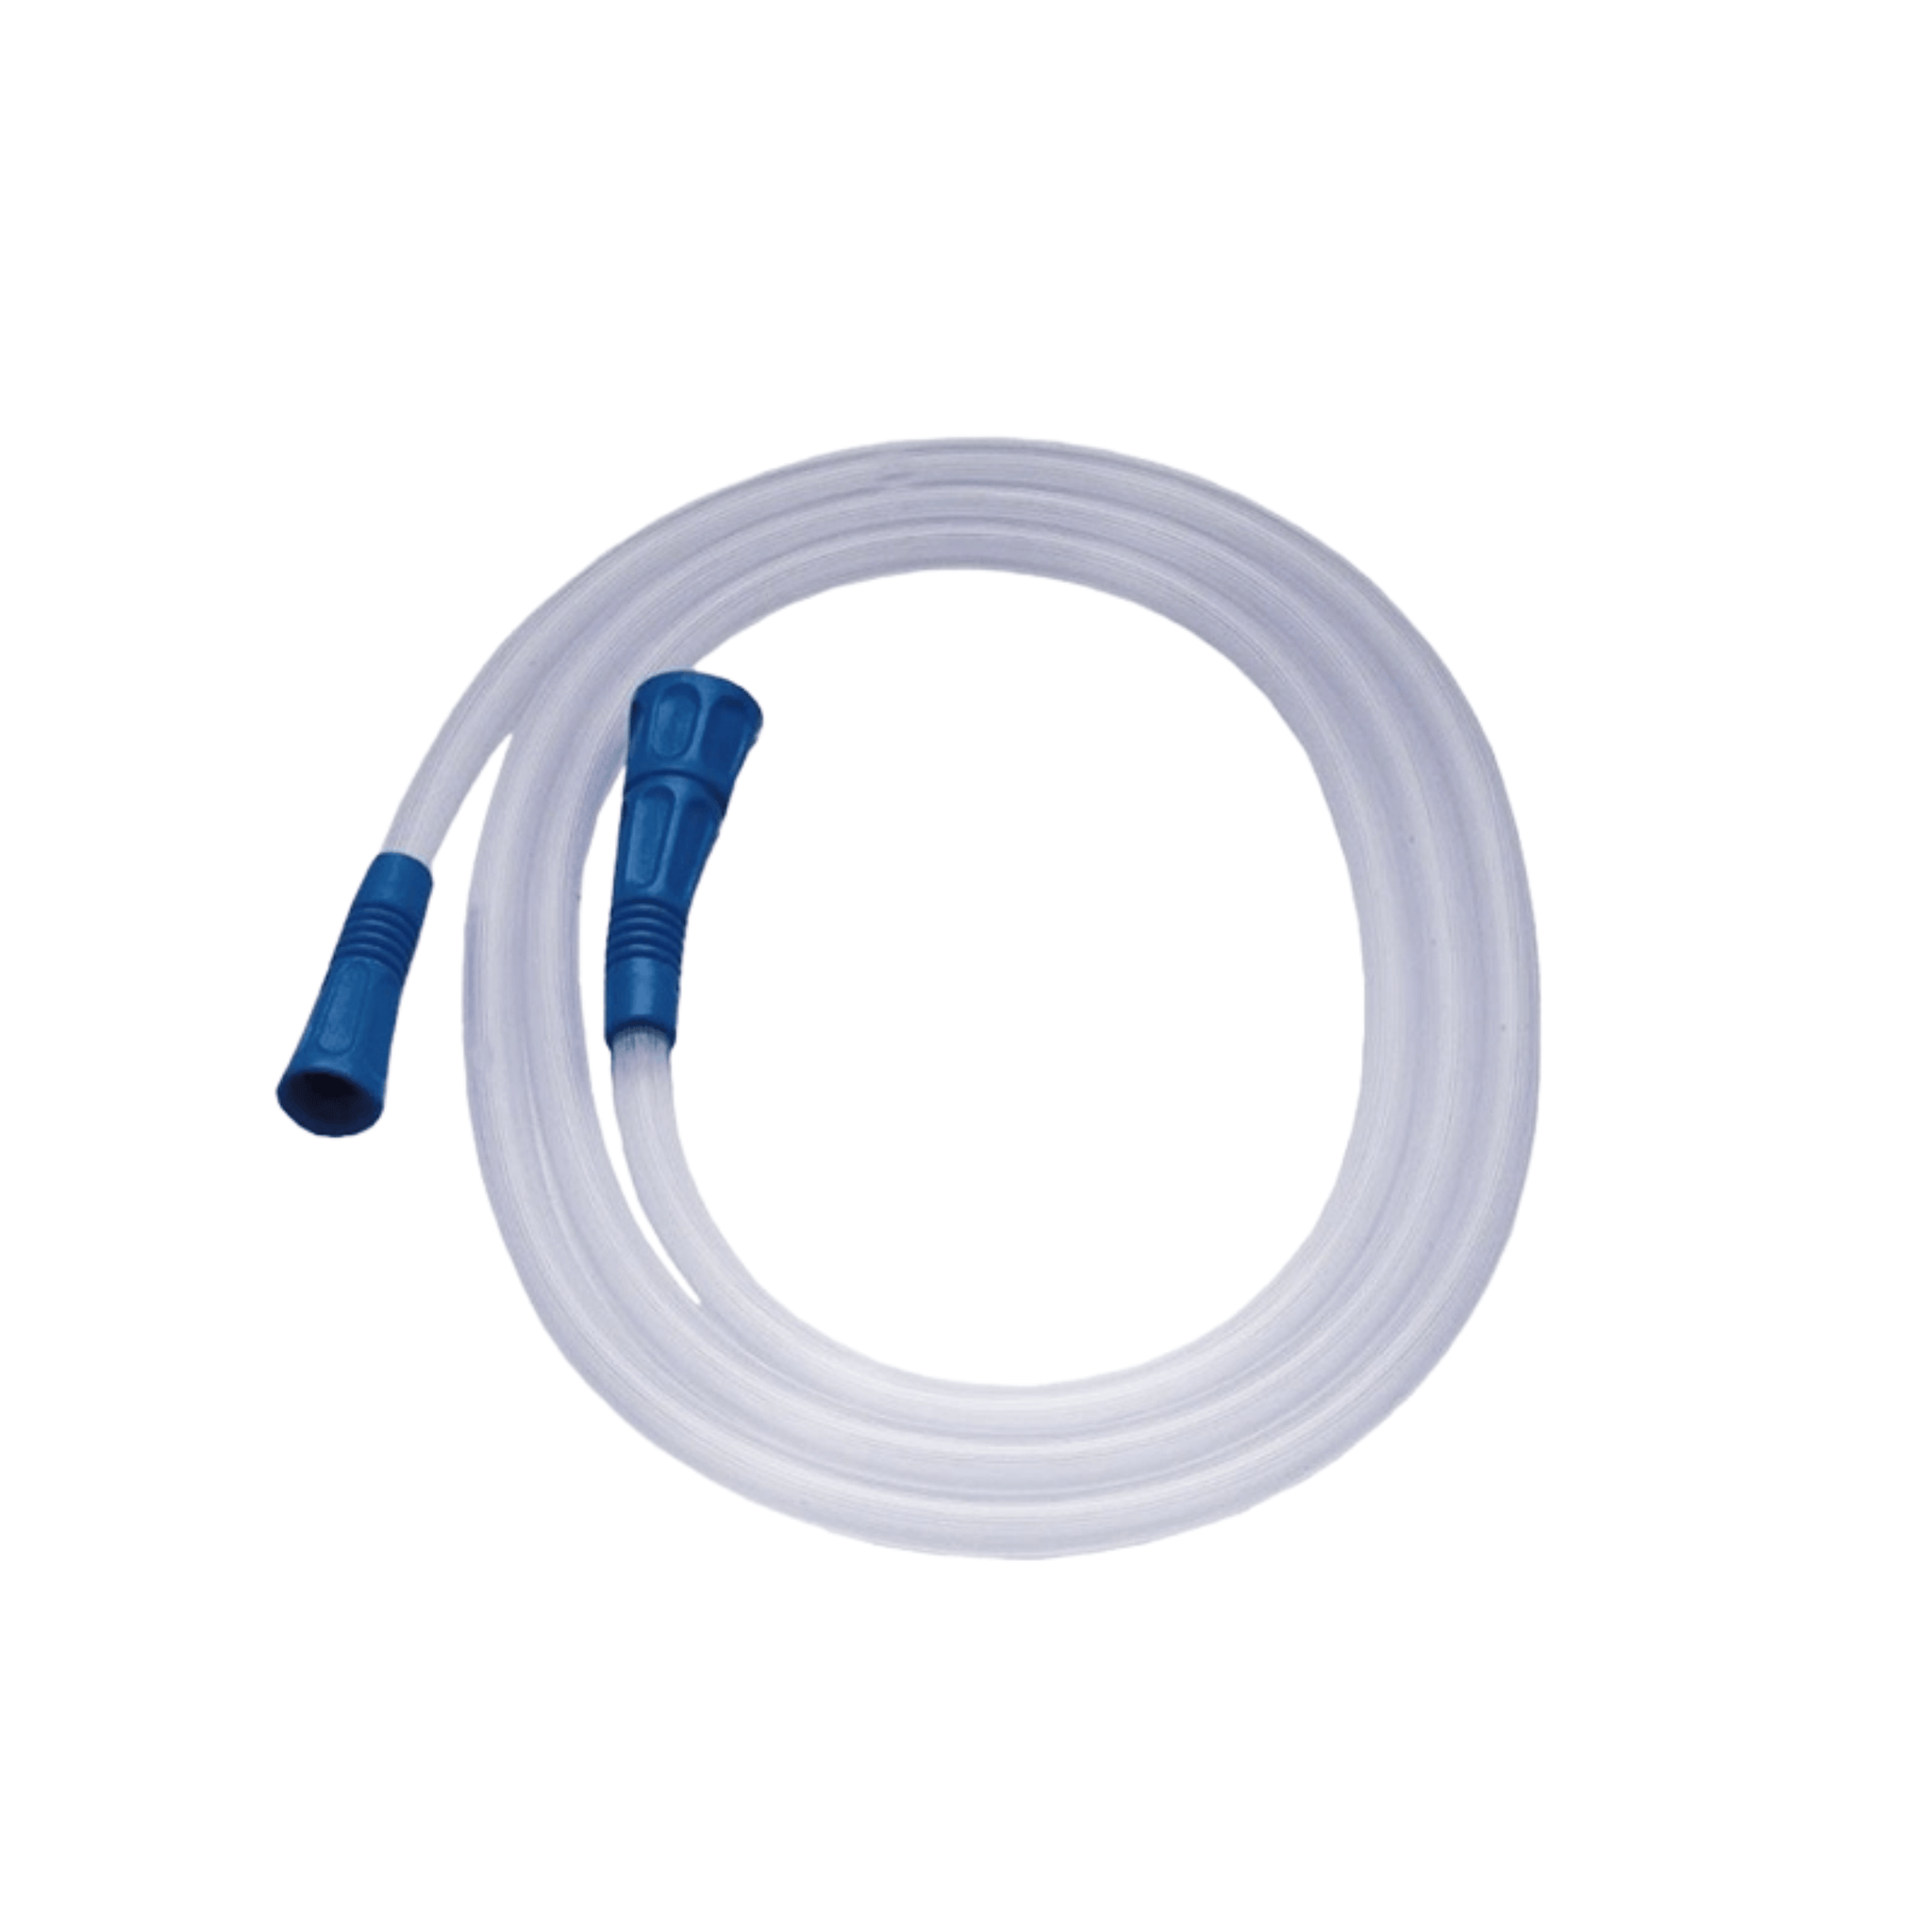 Suction Pump Tube with Connector- 3/16' , 1.8 m